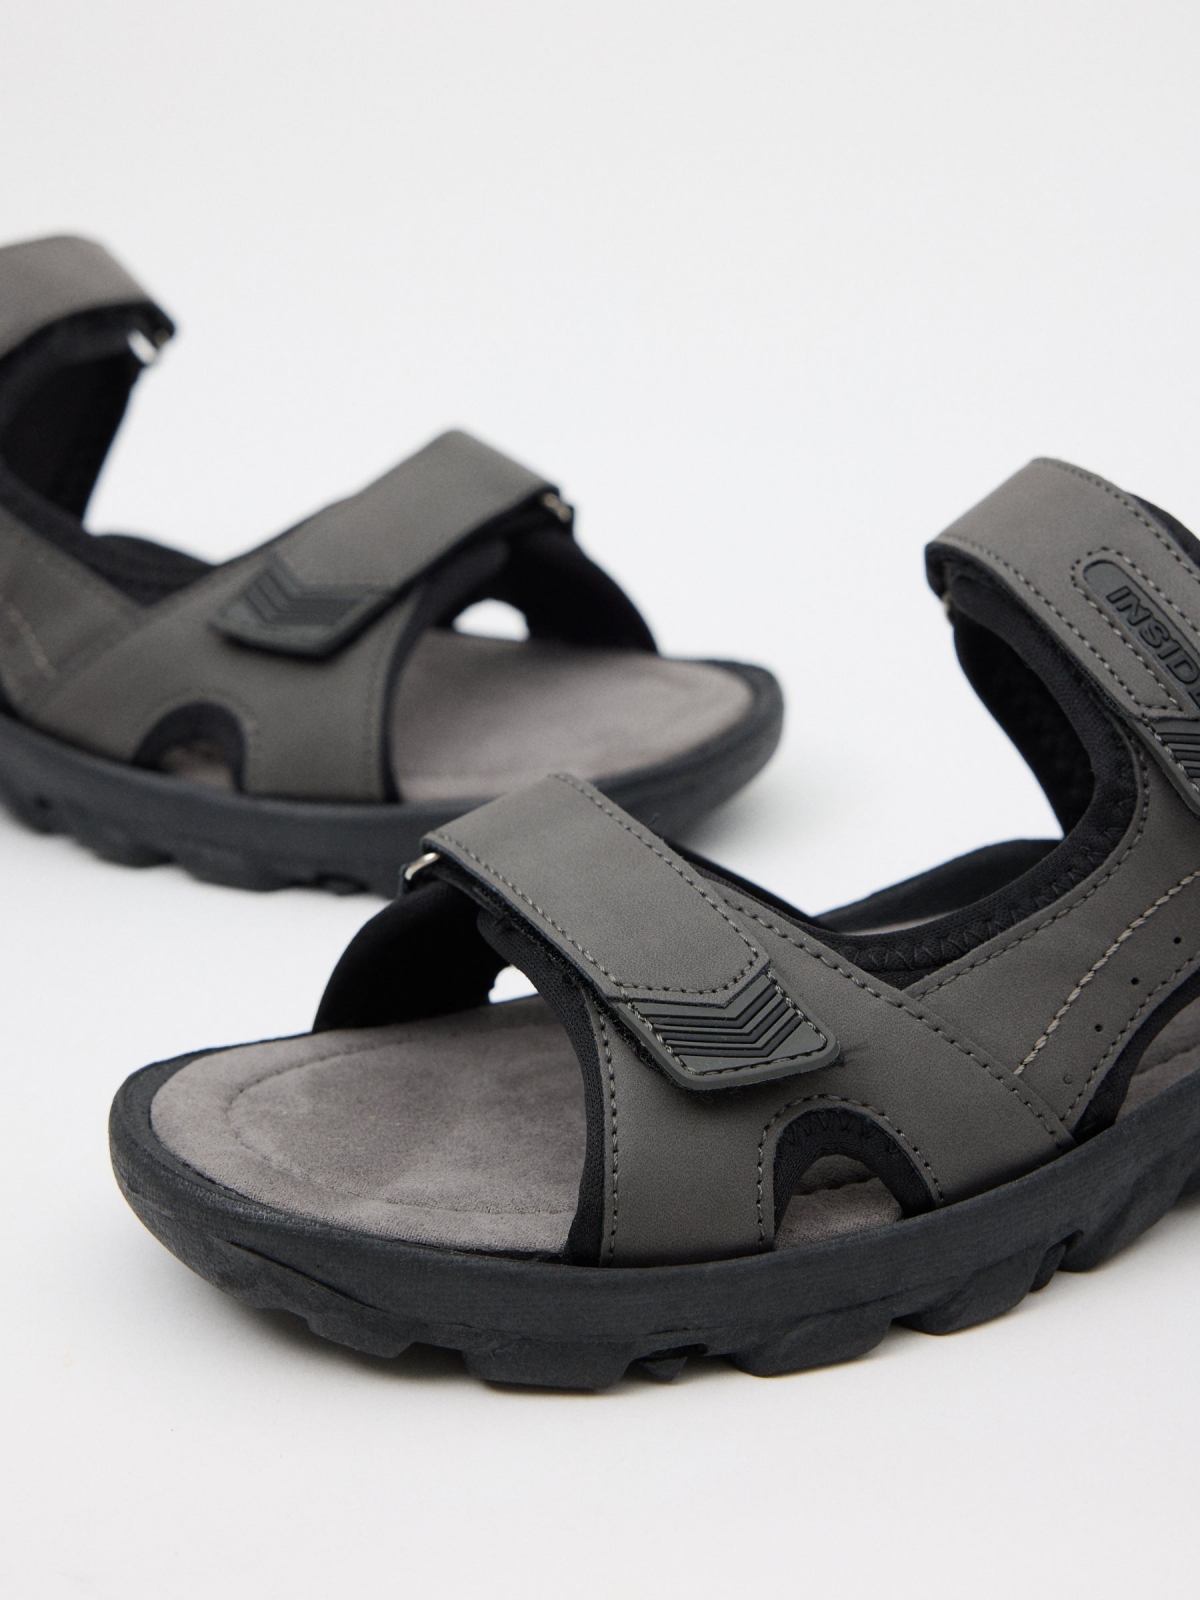 Sports sandal with velcro straps detail view